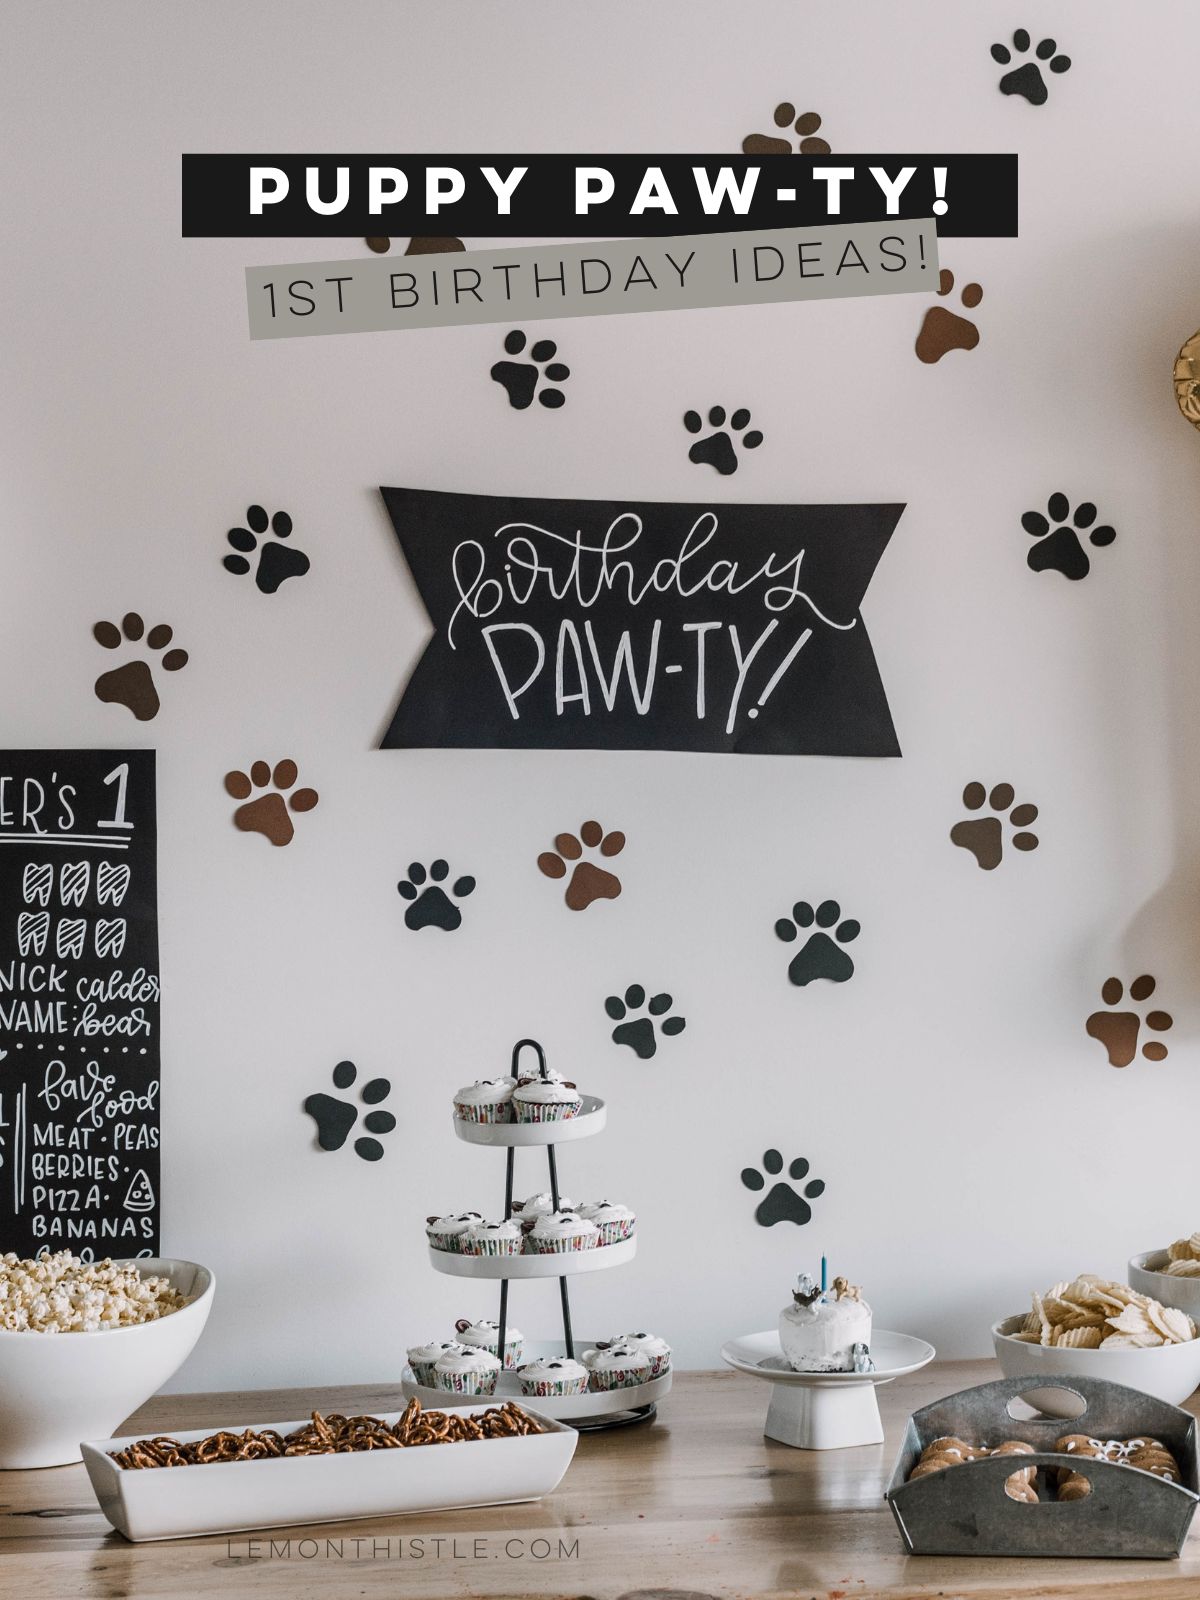 DIY Puppy Birthday Party setup with text over image